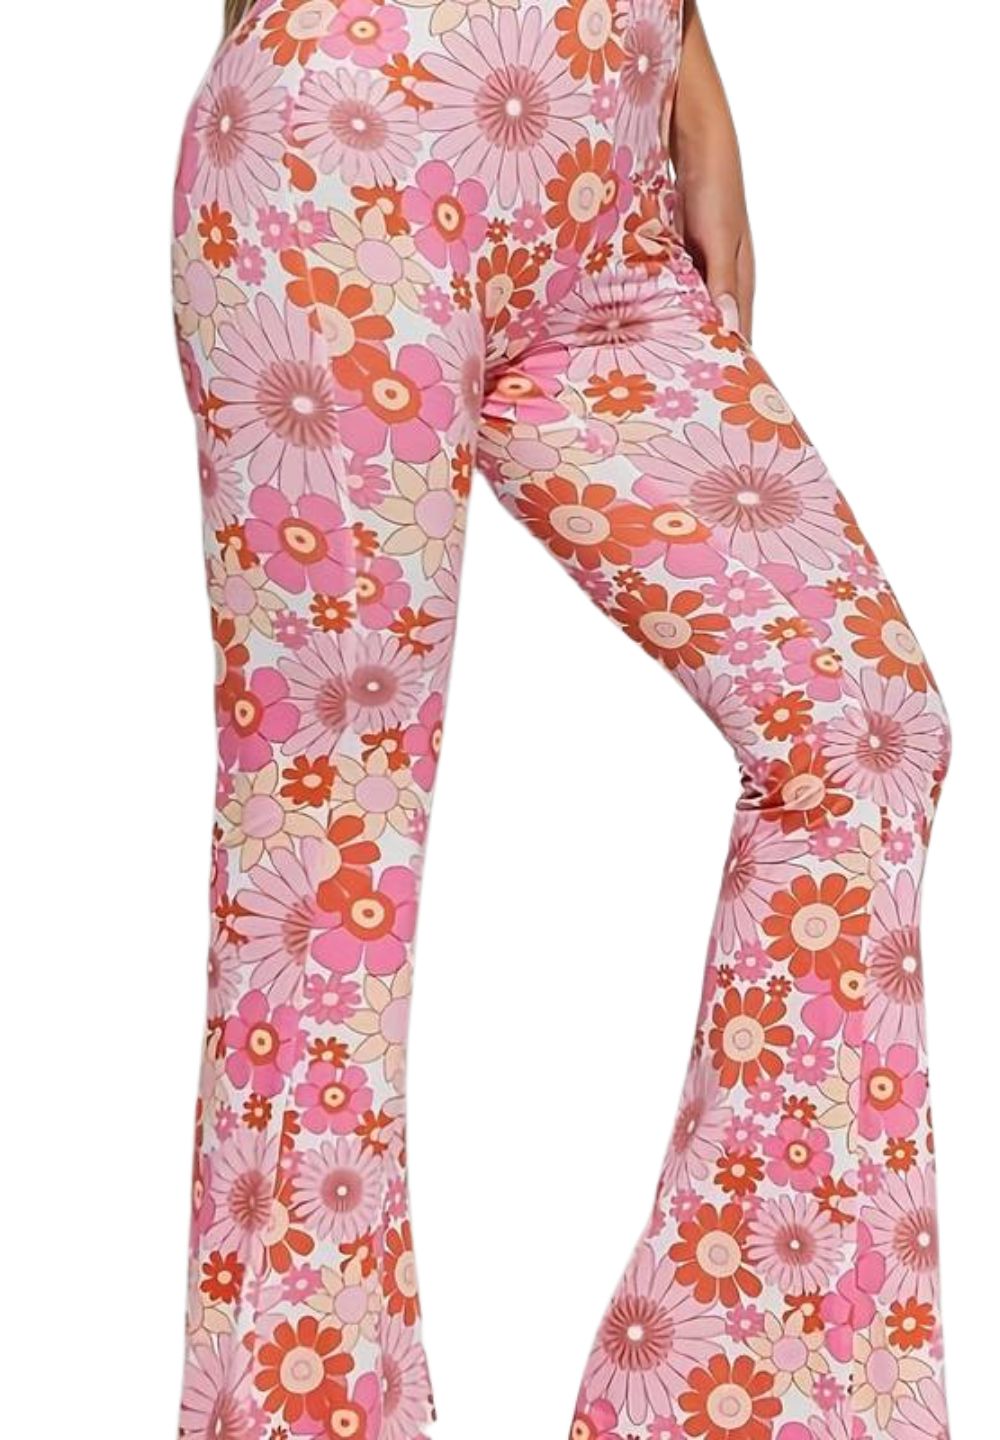 Shein Flared Pants with Funky Pink and Orange Design, Size 2XL